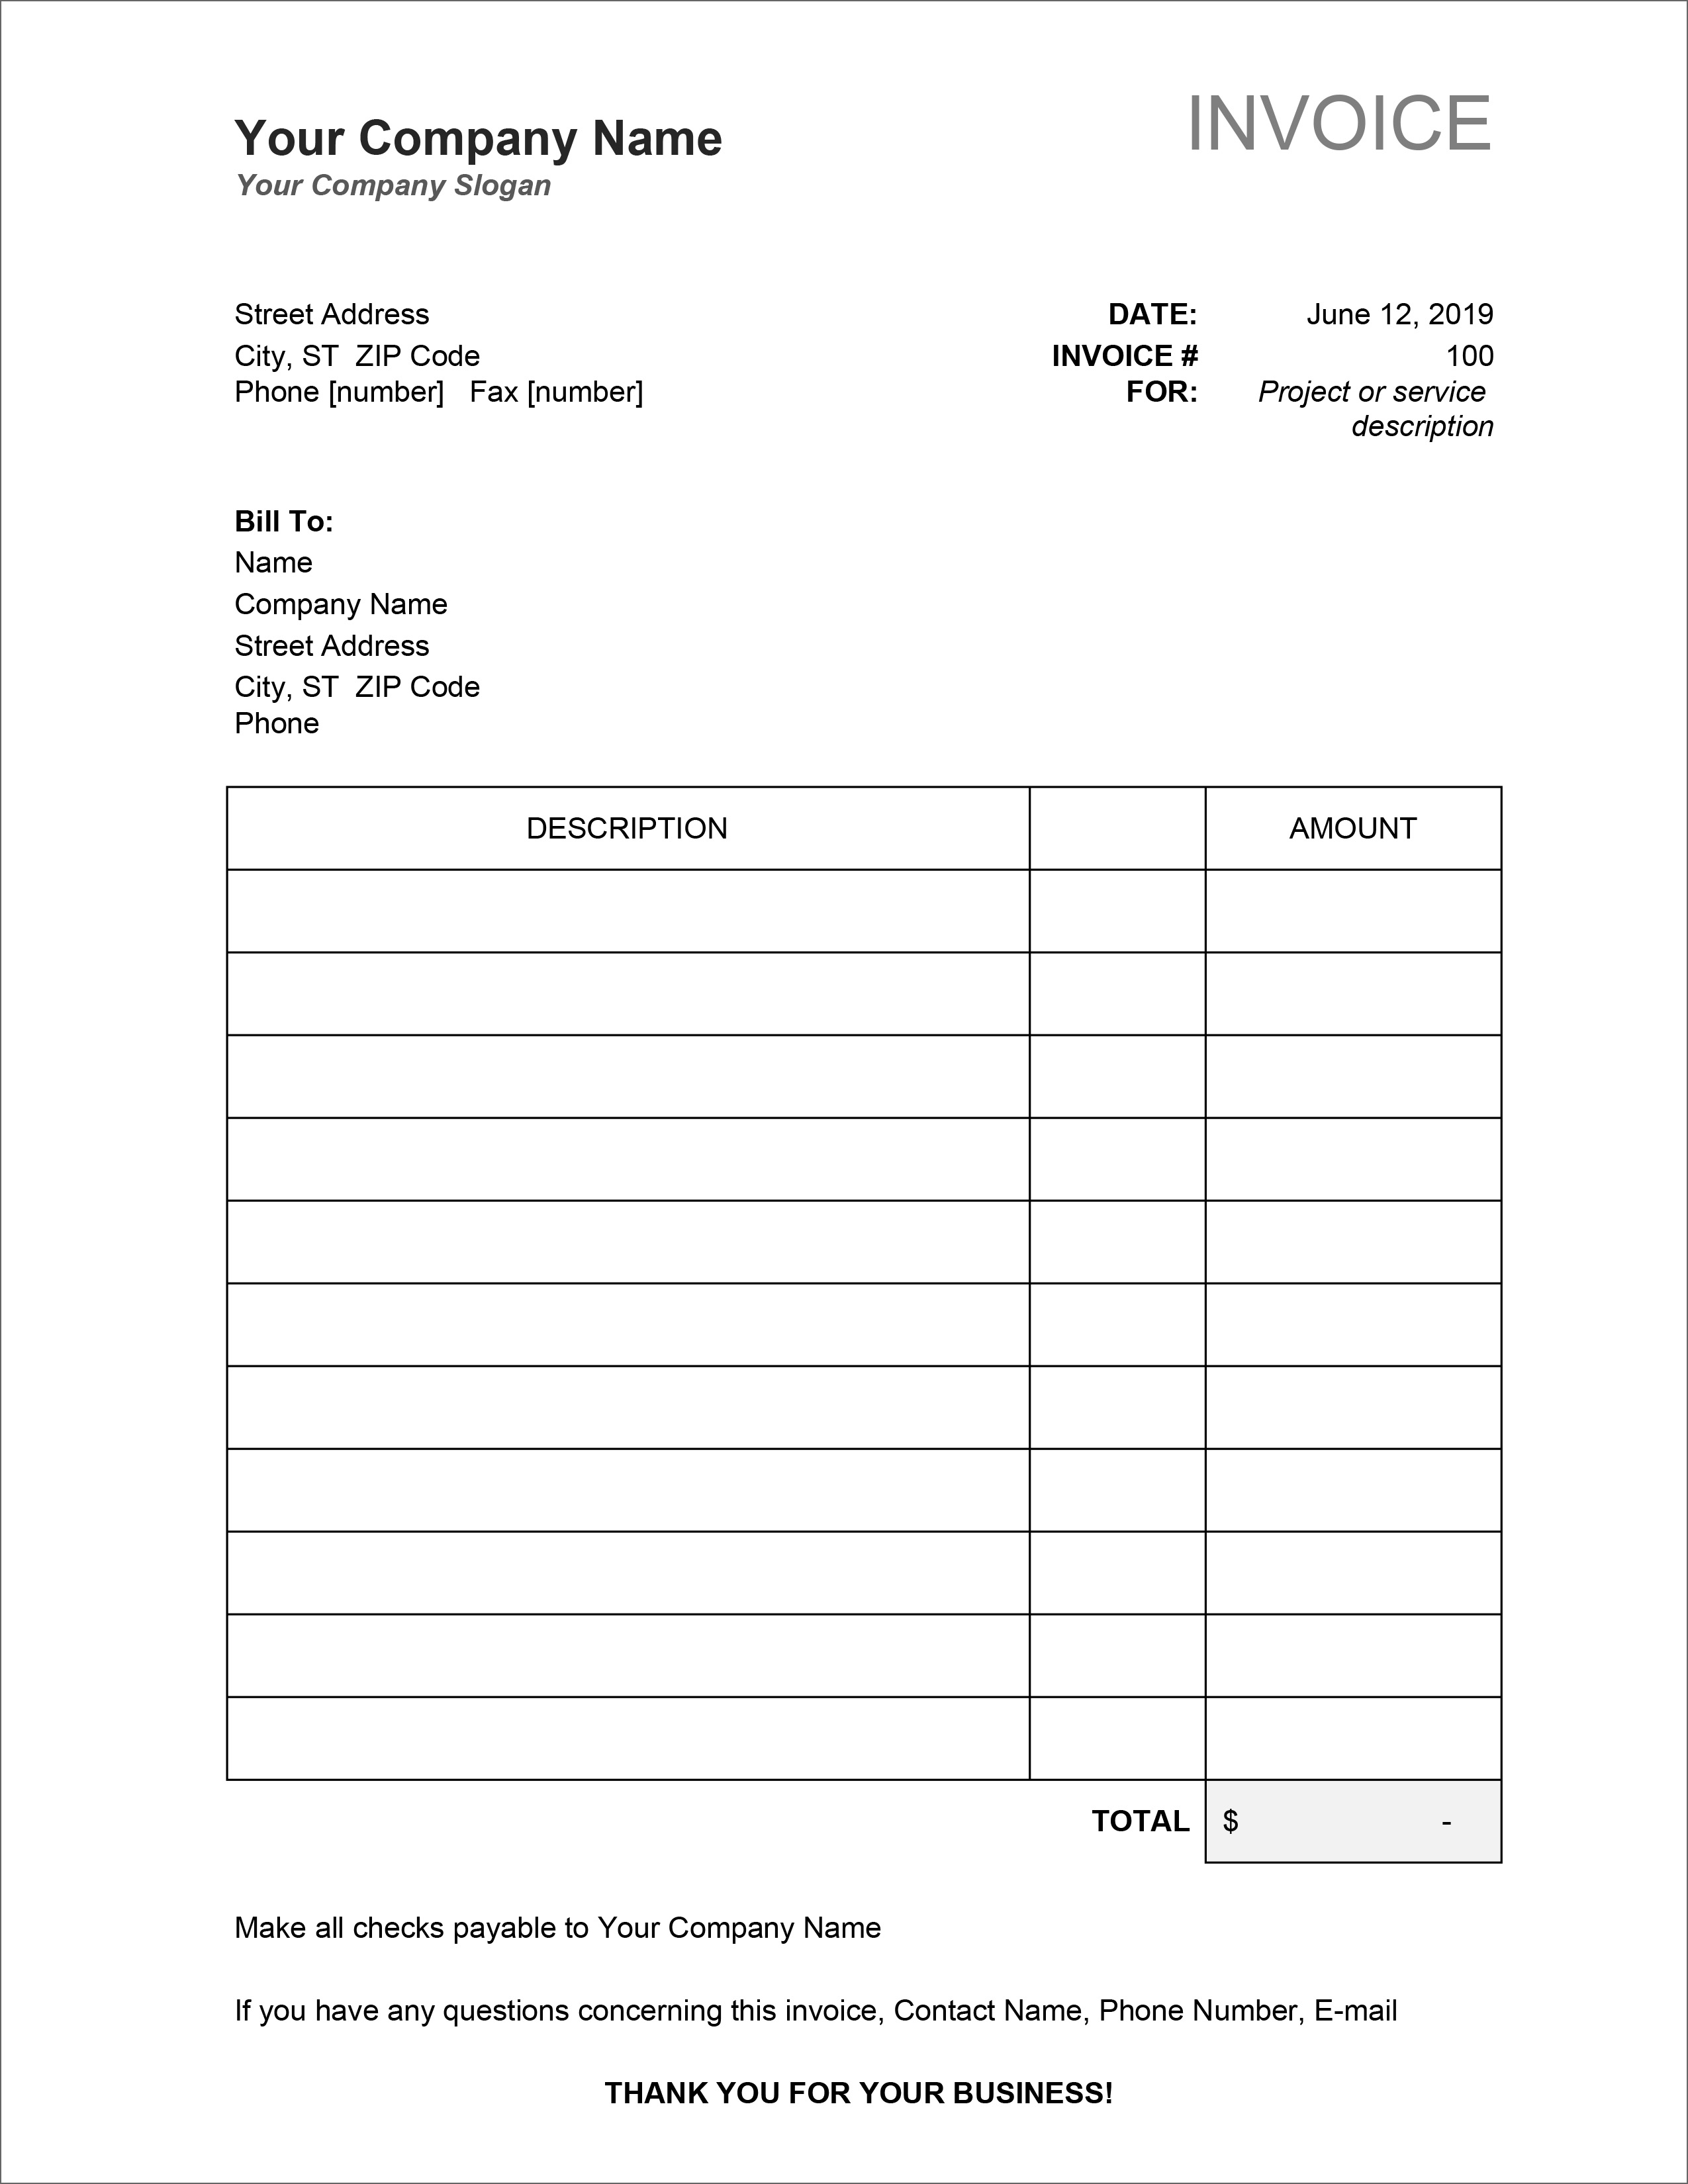 22 Free Invoice Templates In Microsoft Excel And DOCX Formats With Free Business Invoice Template Downloads